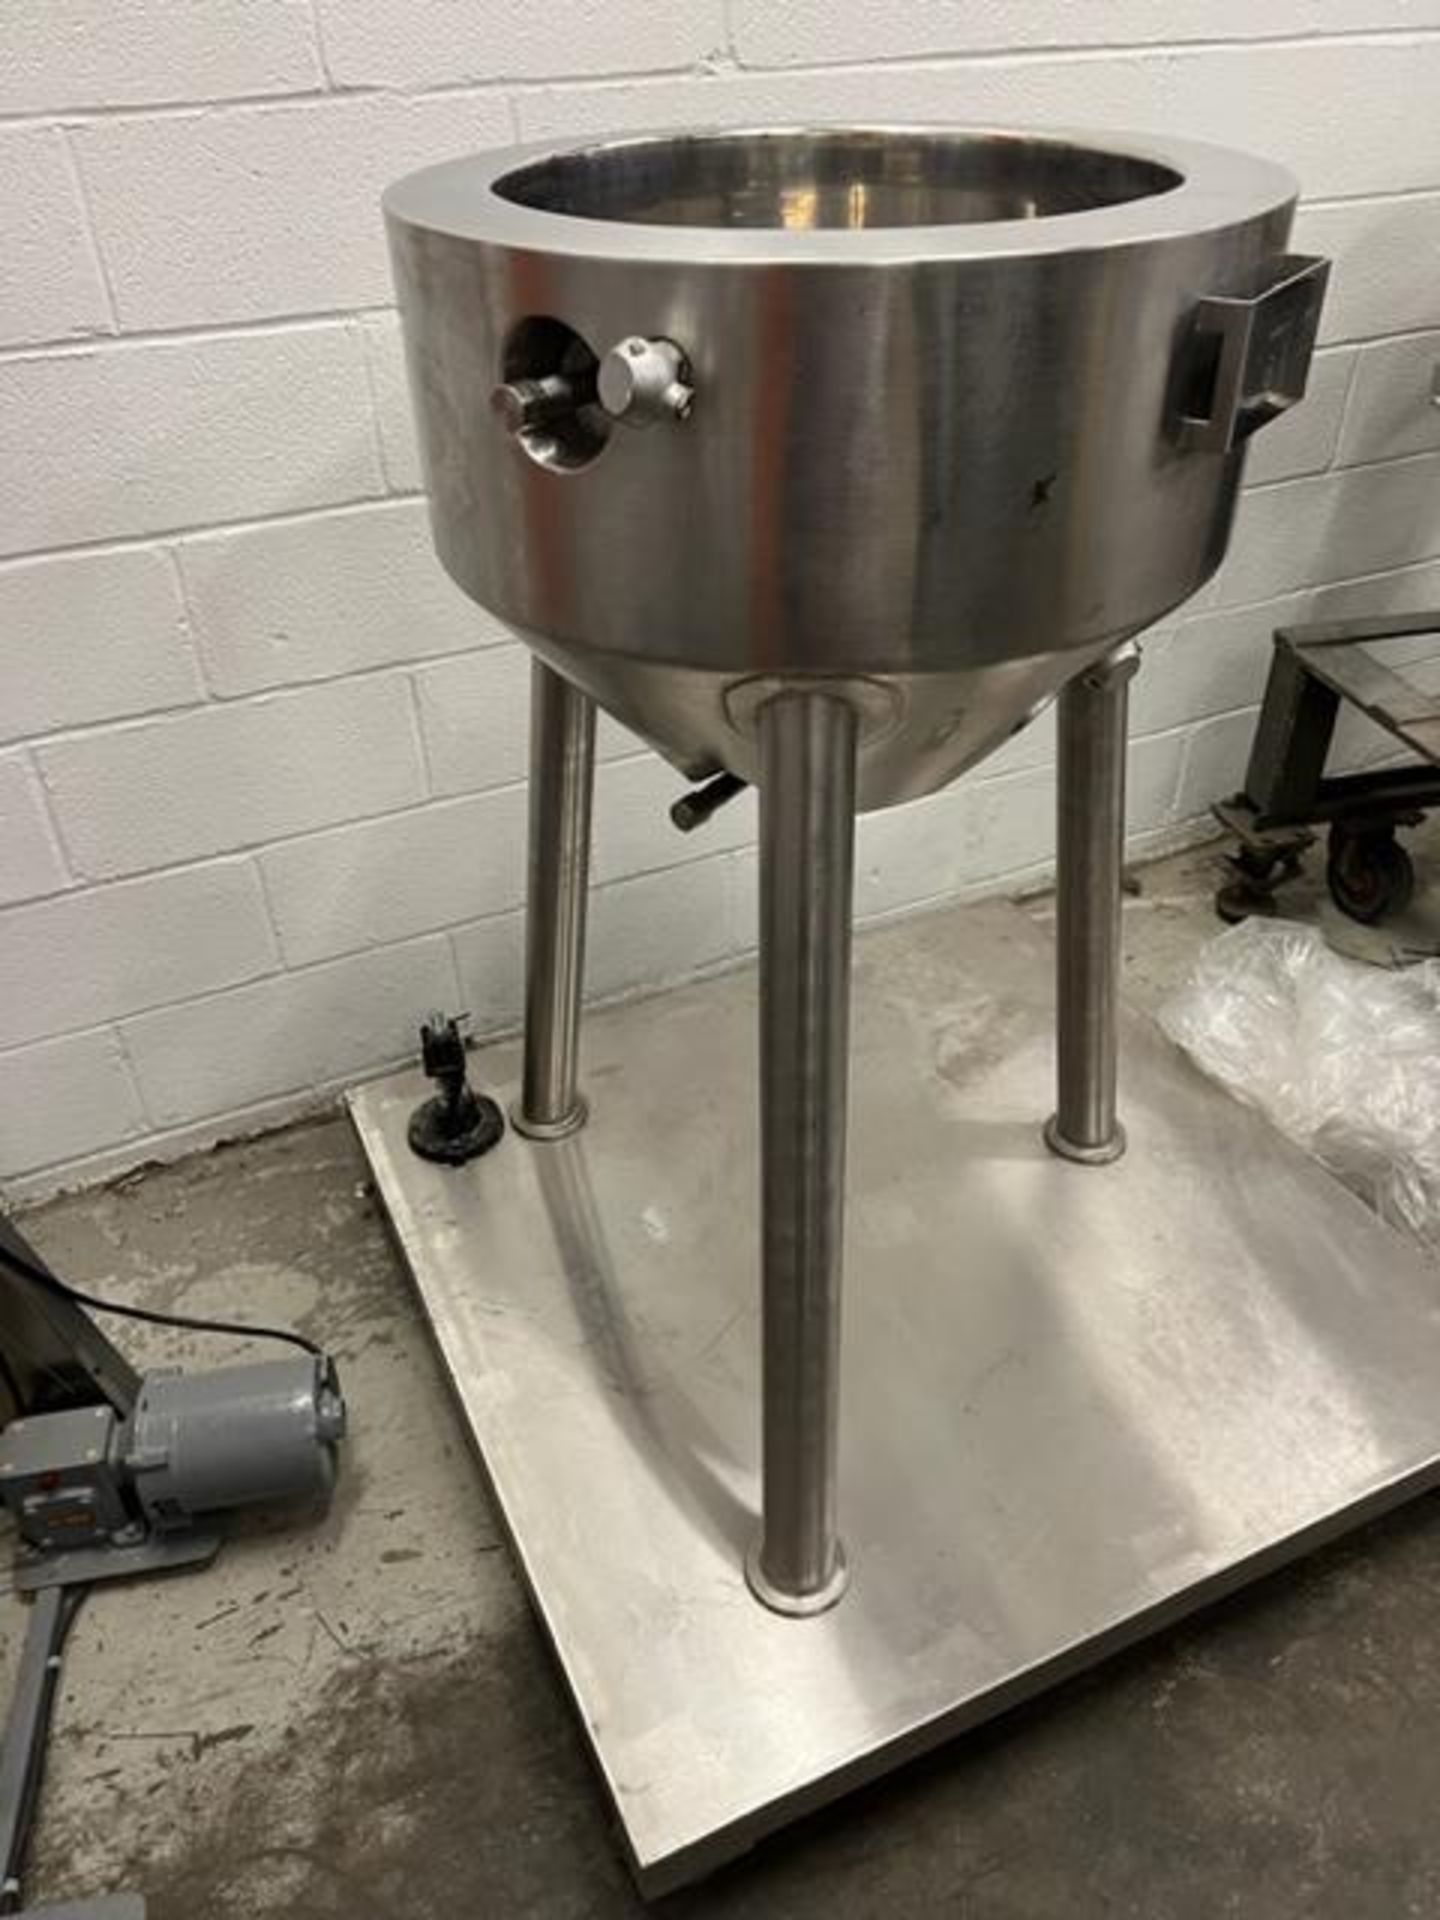 Asset 316 - Hermann Waldner 20 gallon Stainless Steel Jacketed tank with cone bottom with